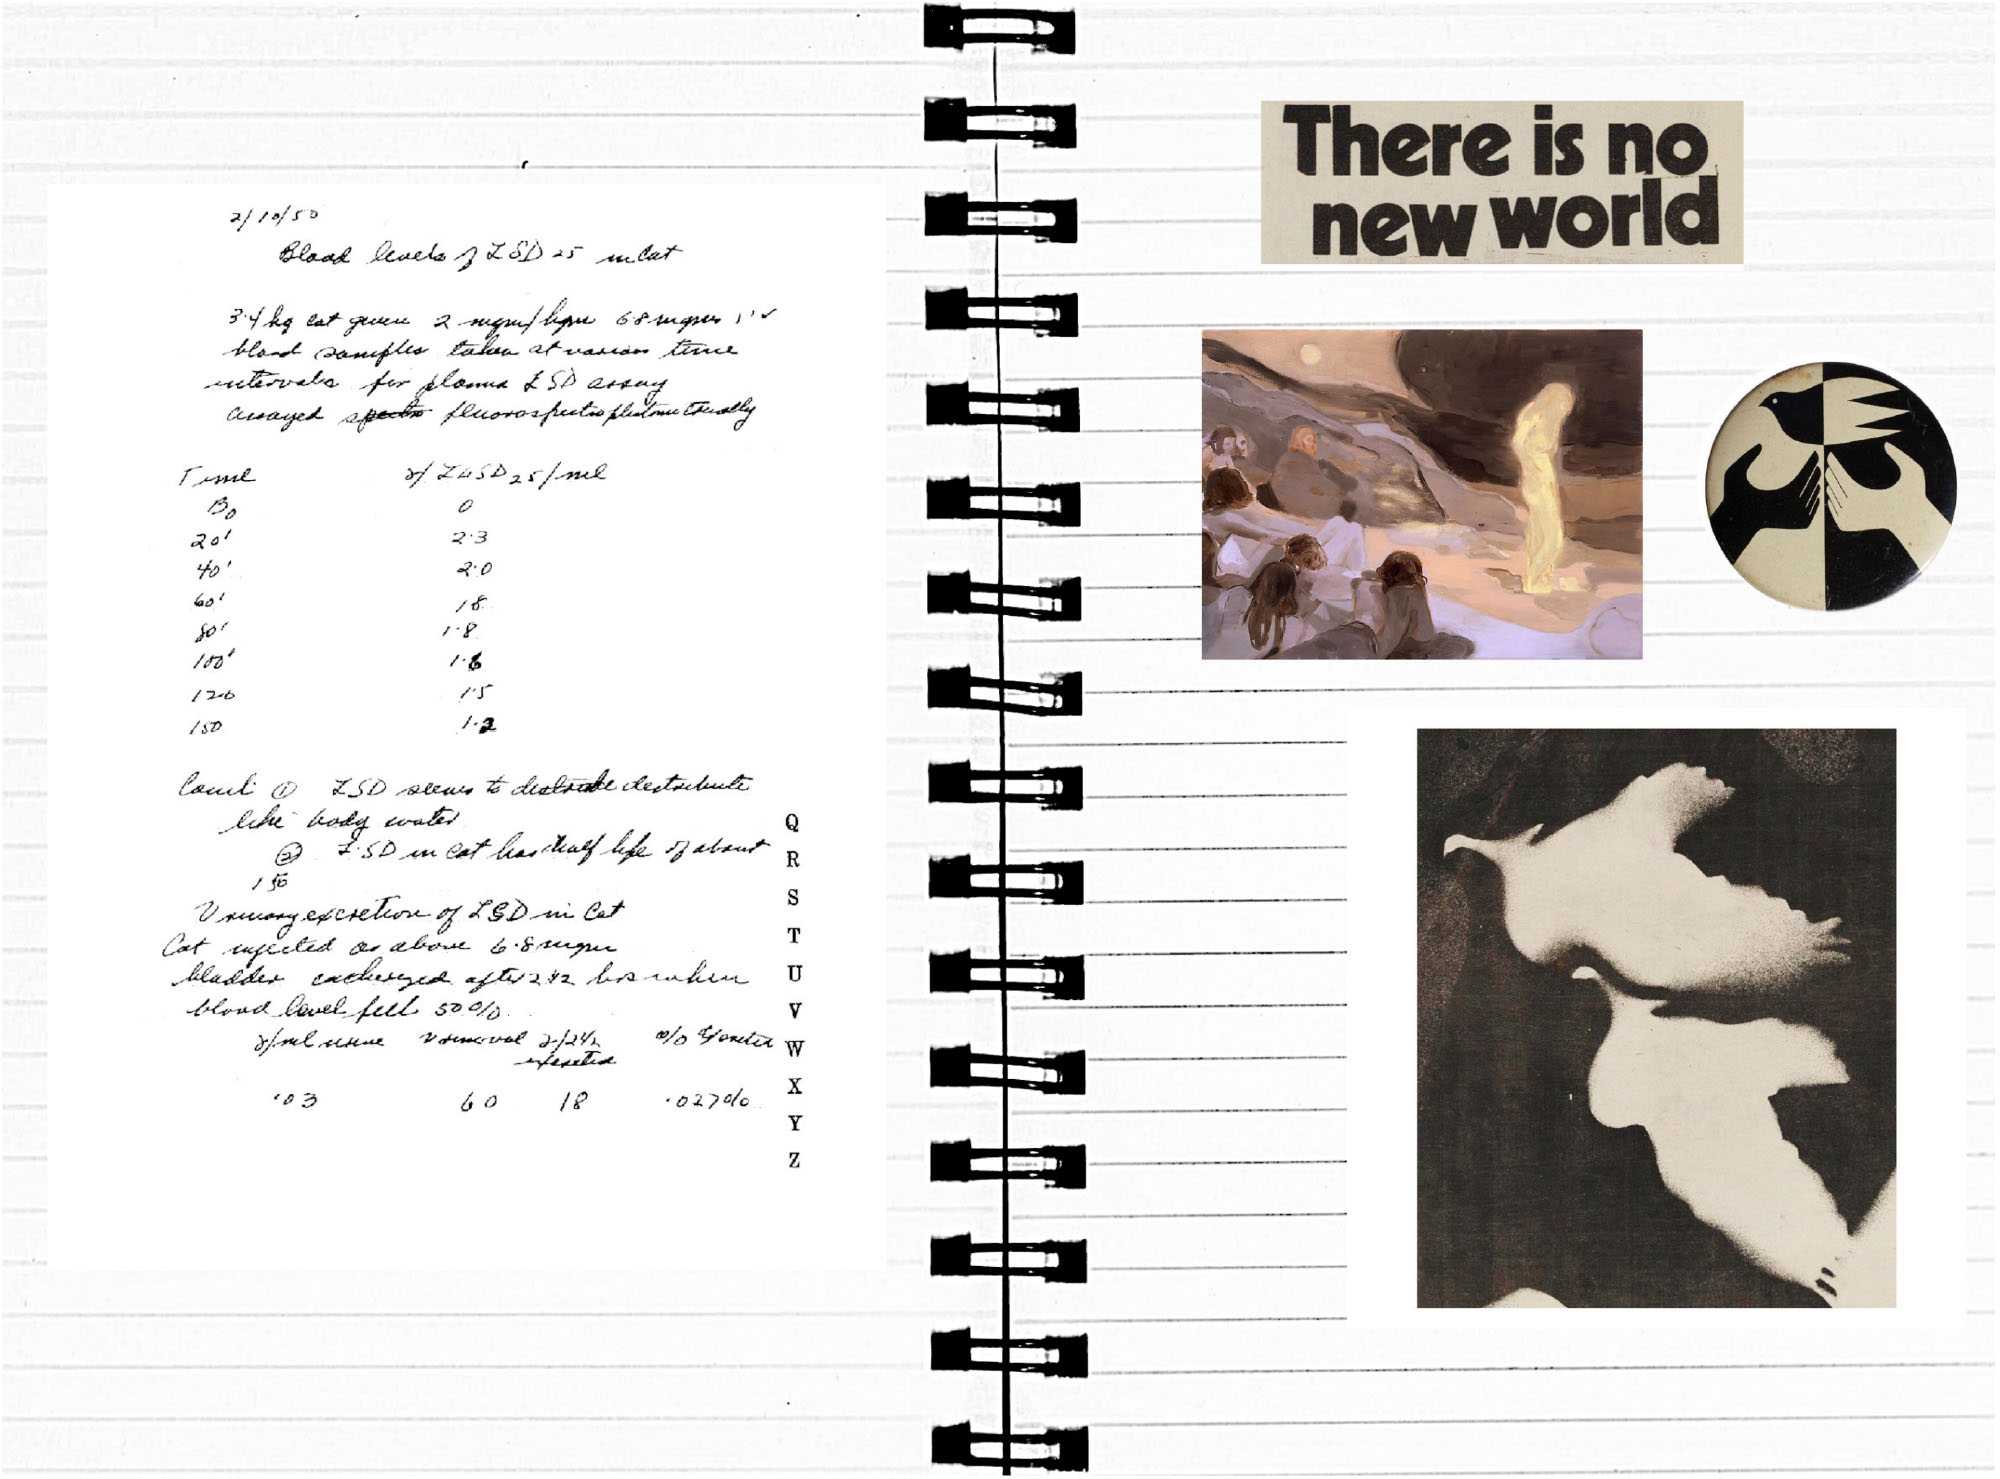 exmouth_scrapbook_notes_on_utopia_final_version-9